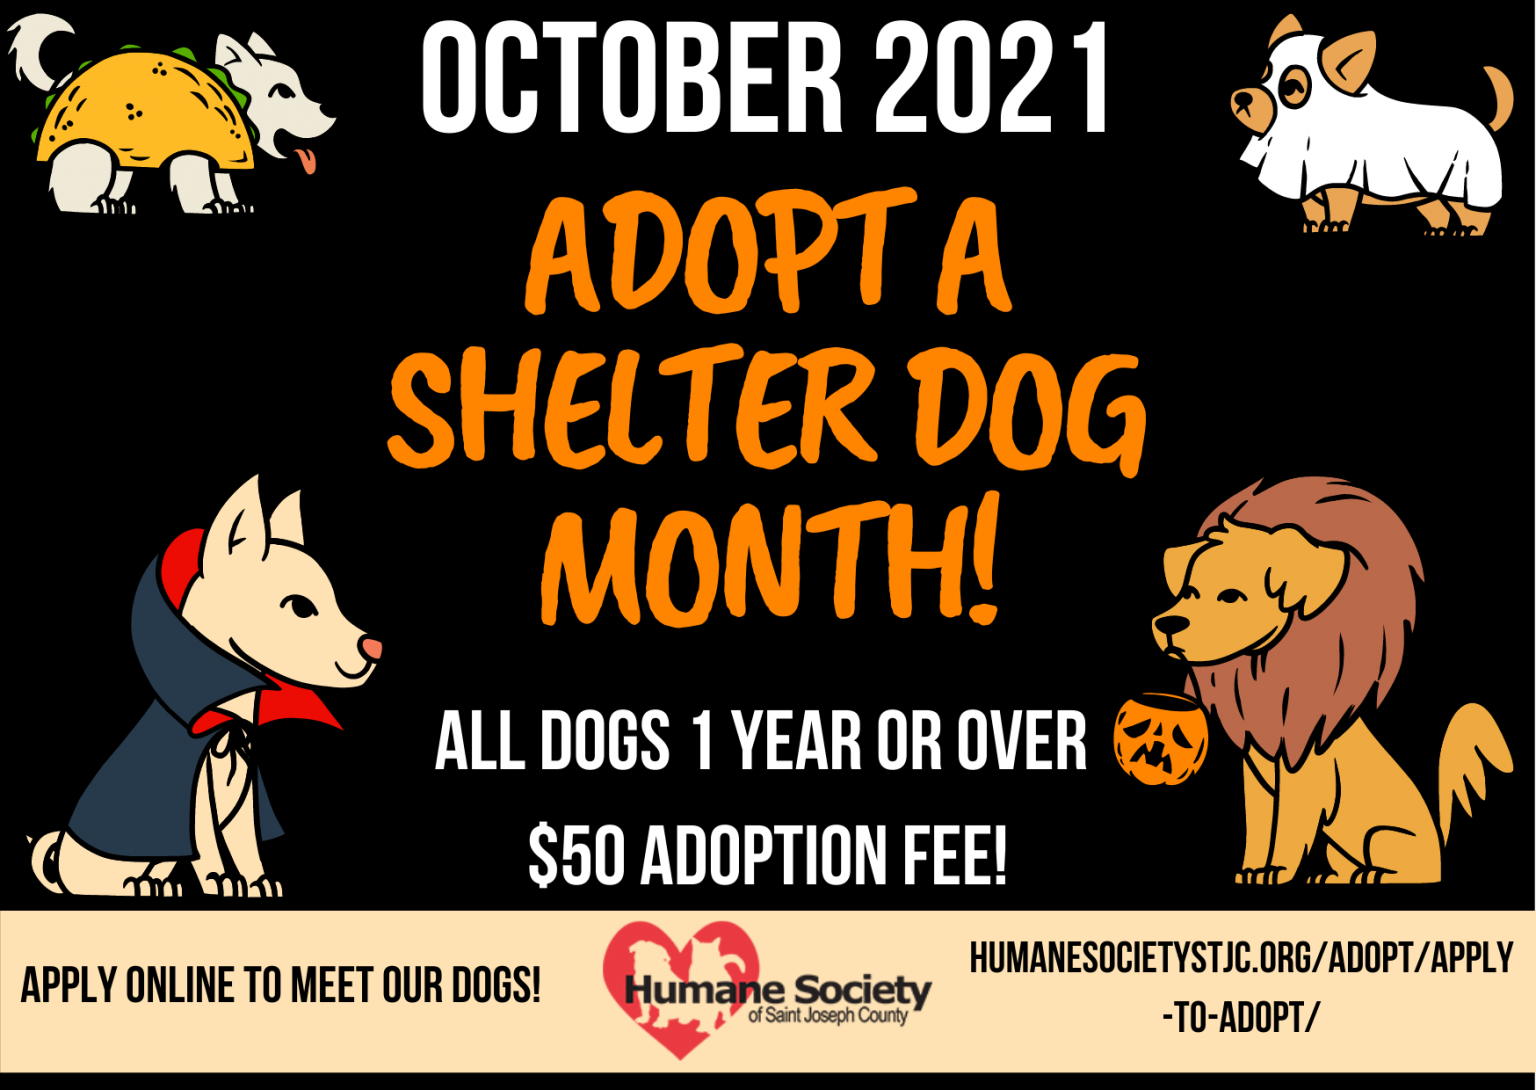 October is Adopt A Shelter Dog Month! Humane Society of St. Joseph County